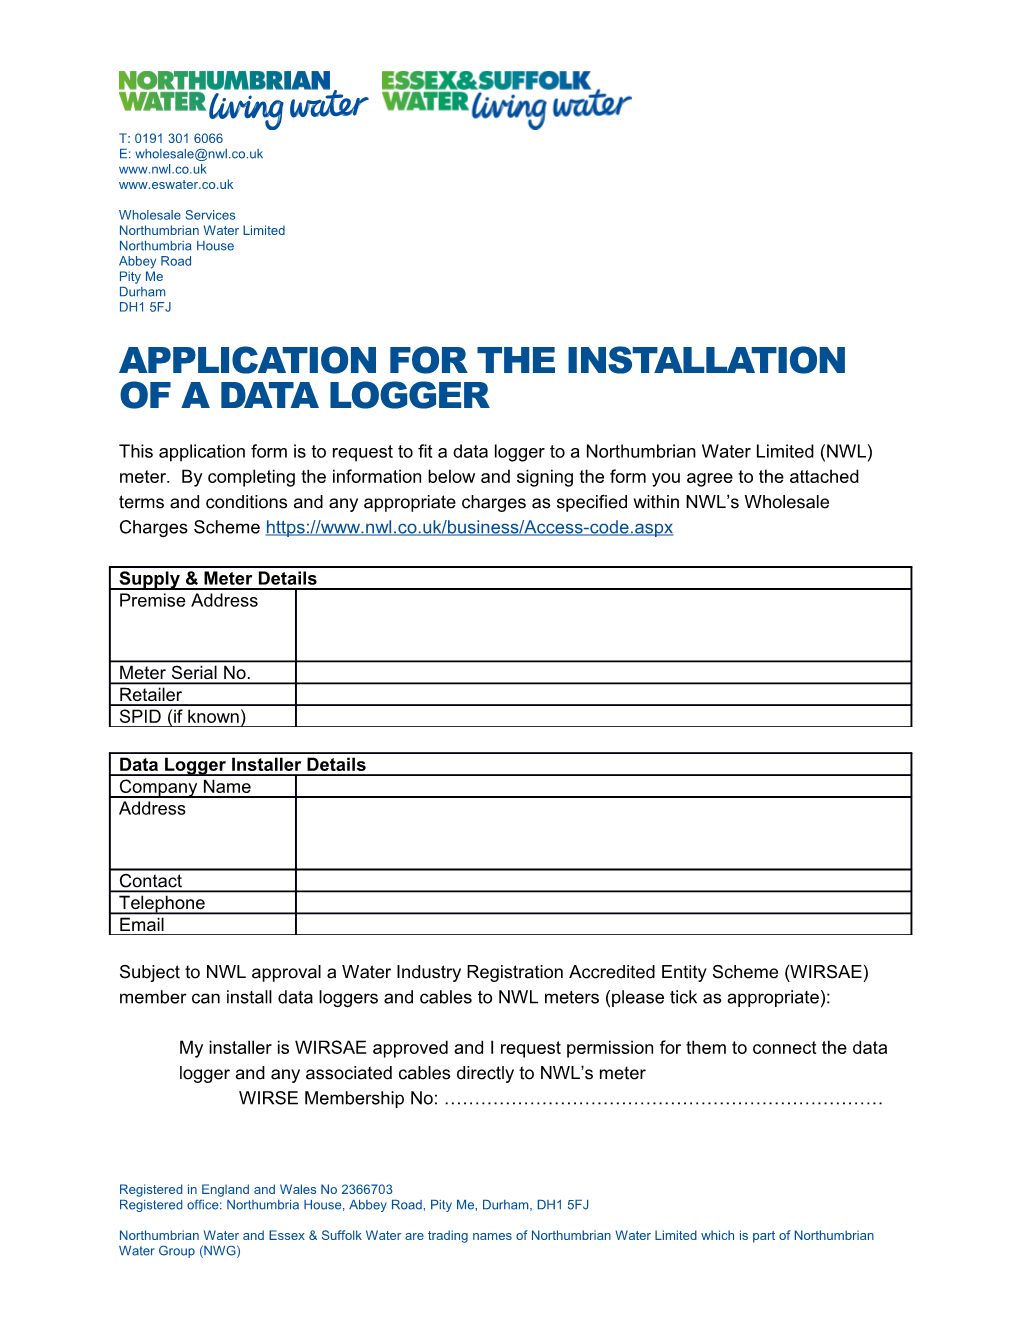 Application for the Installation of a Data Logger